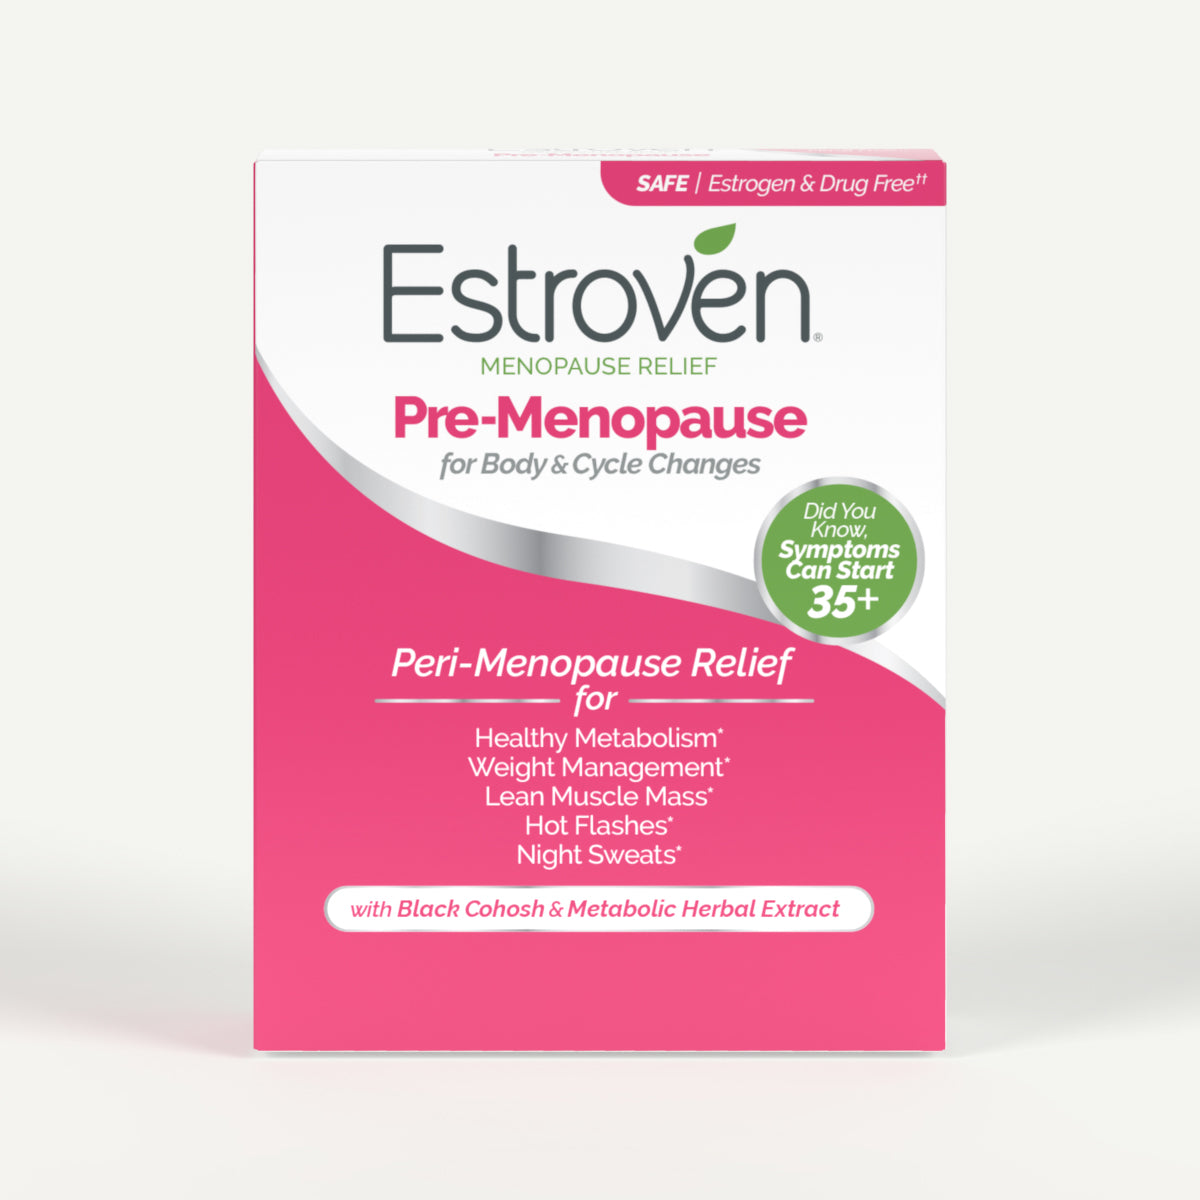 Estroven® Menopause Relief - Pre-Menopause for Body & Cycle Changes